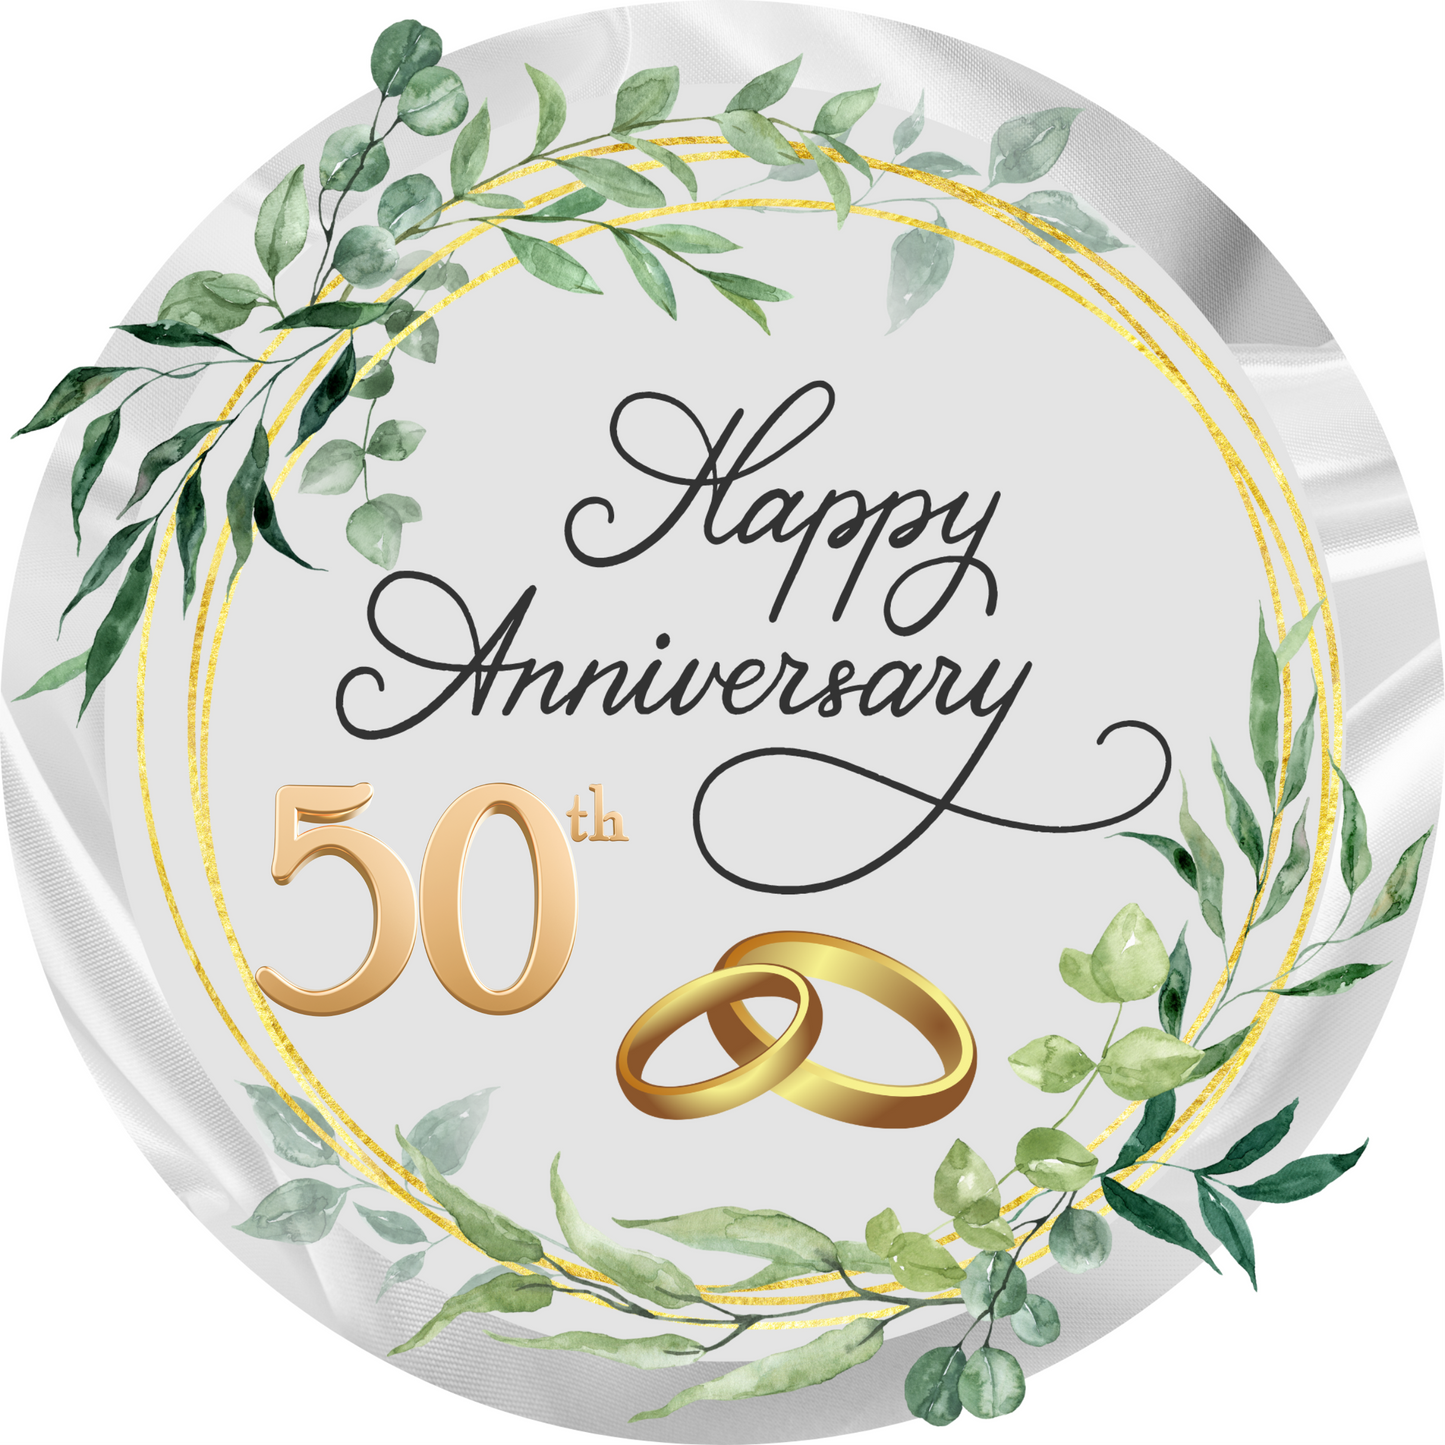 Happy 50th Anniversary with Rings Round- Silver and Gold